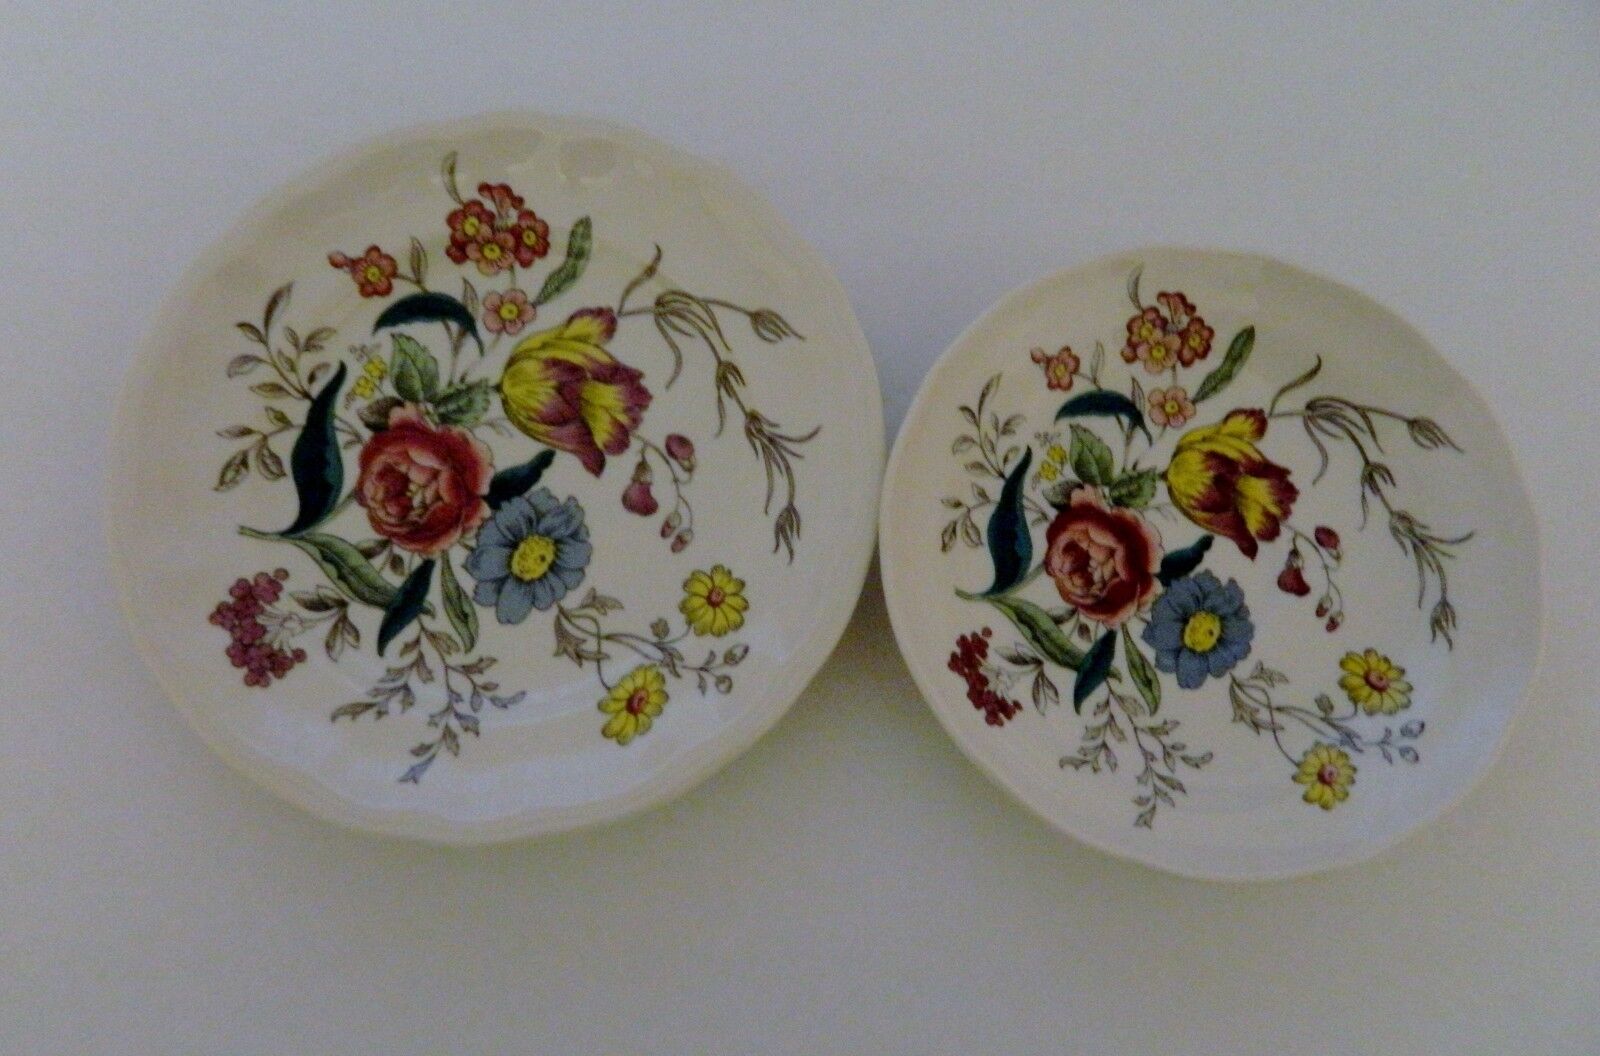 Spode China Made in England Gainesborough 1 Bread & Butter Plate 1 Saucer Floral